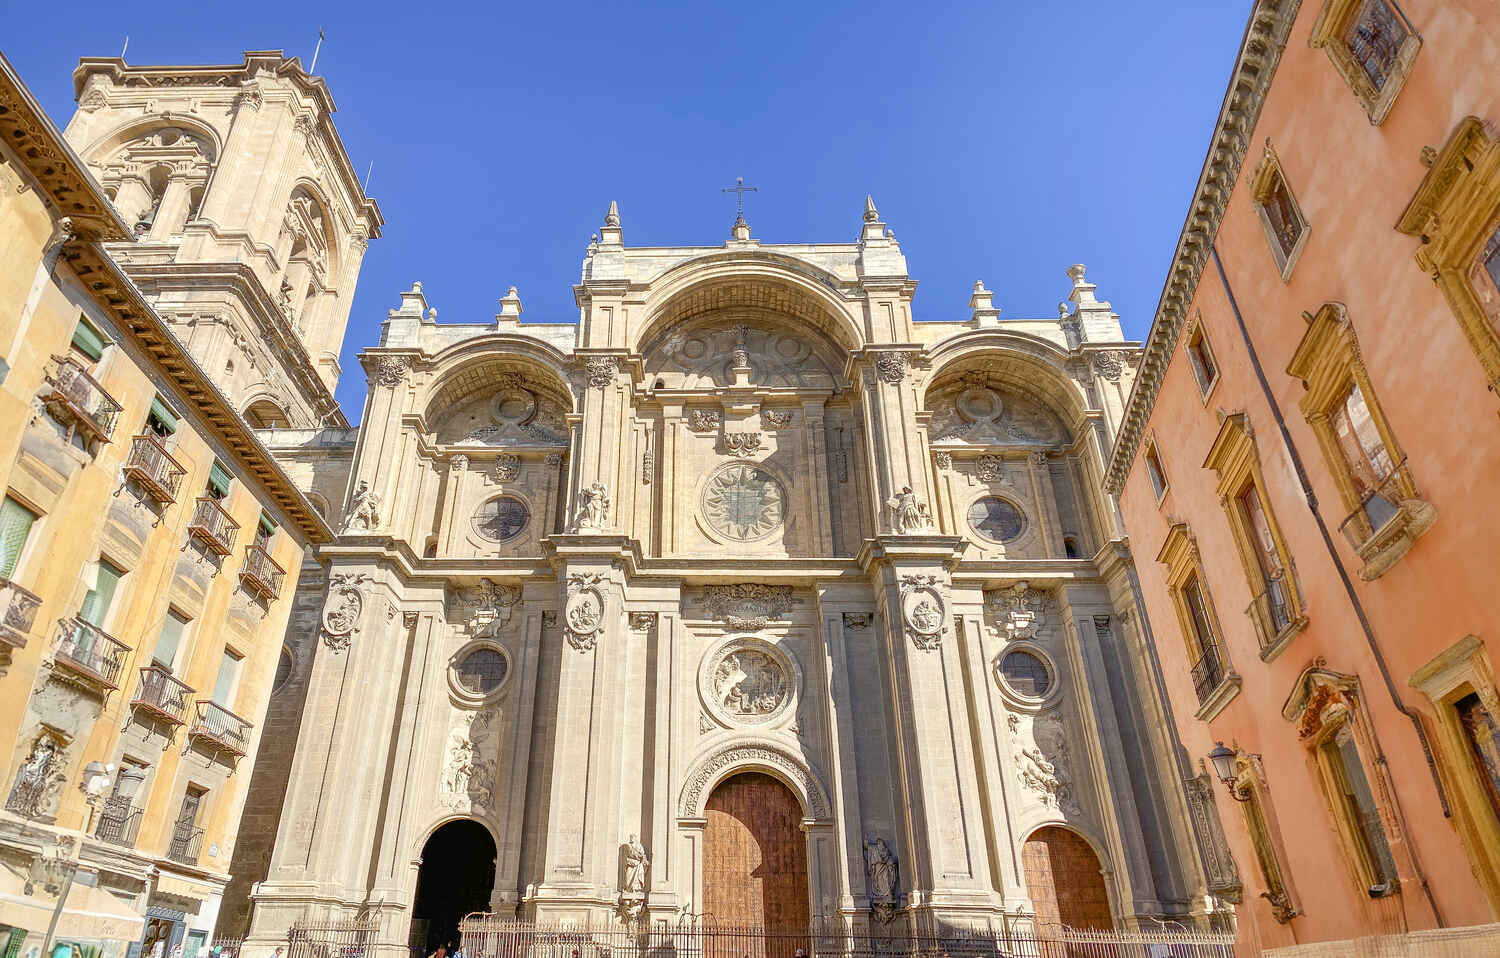 Facade of the Cathedral of Granada